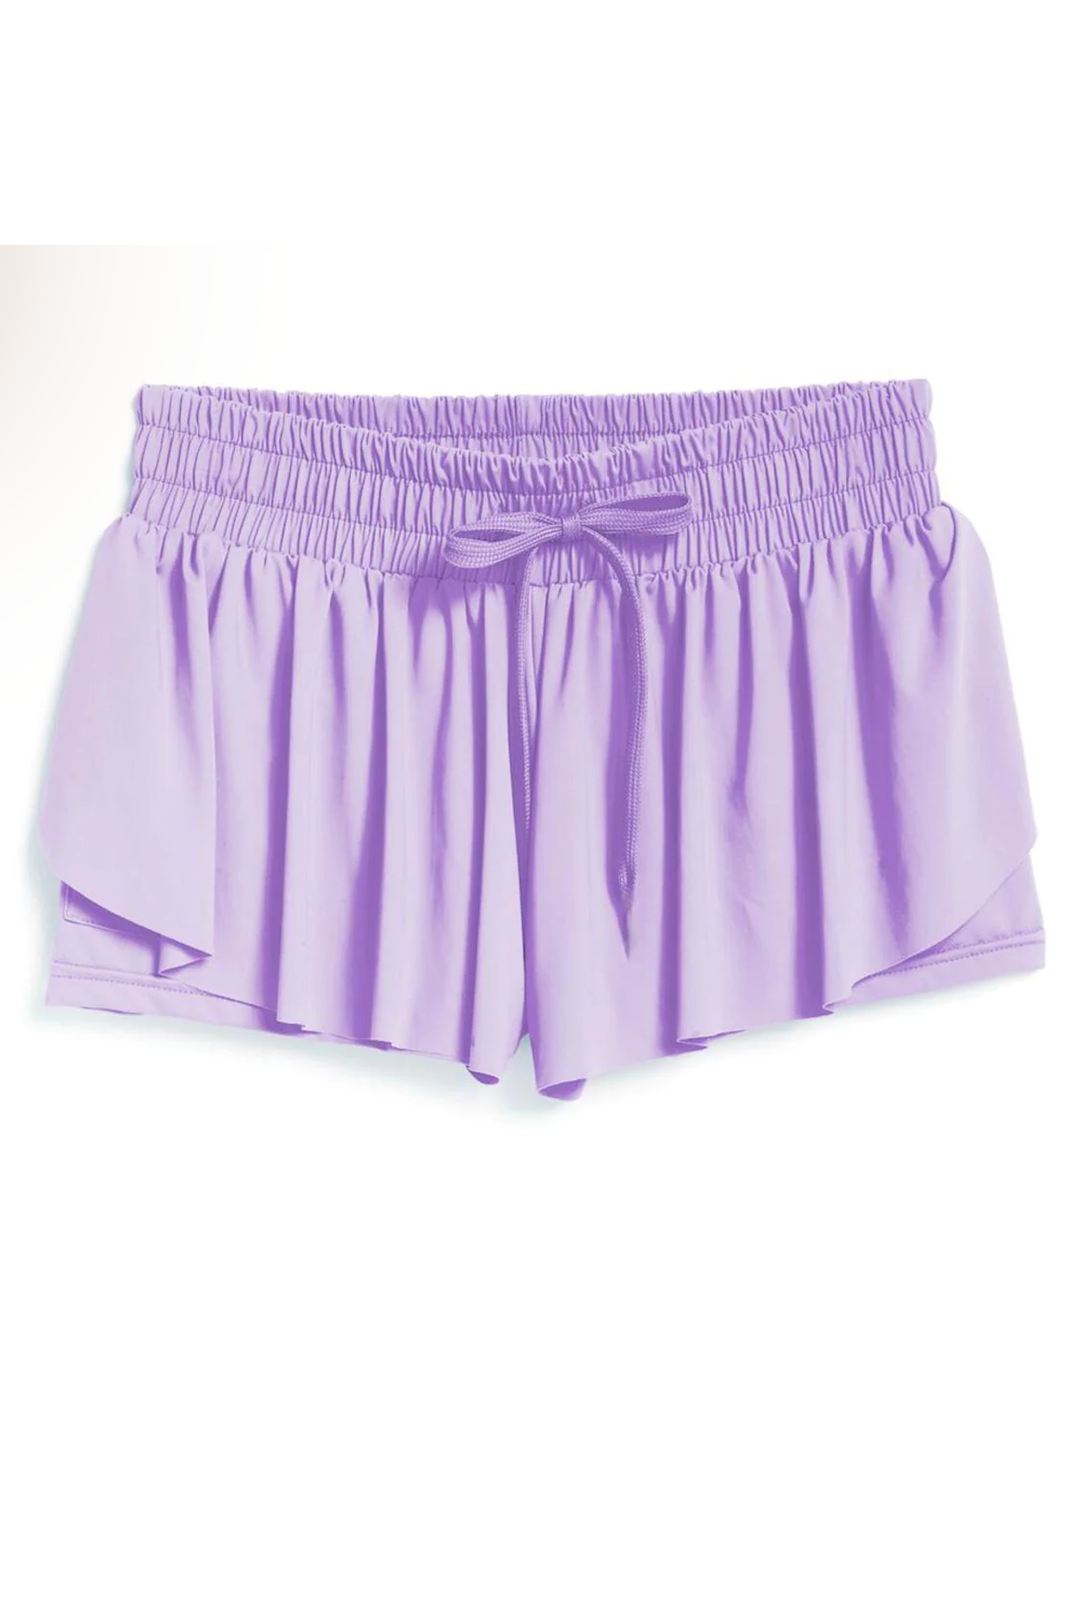 Fly Away Shorts in Lavender